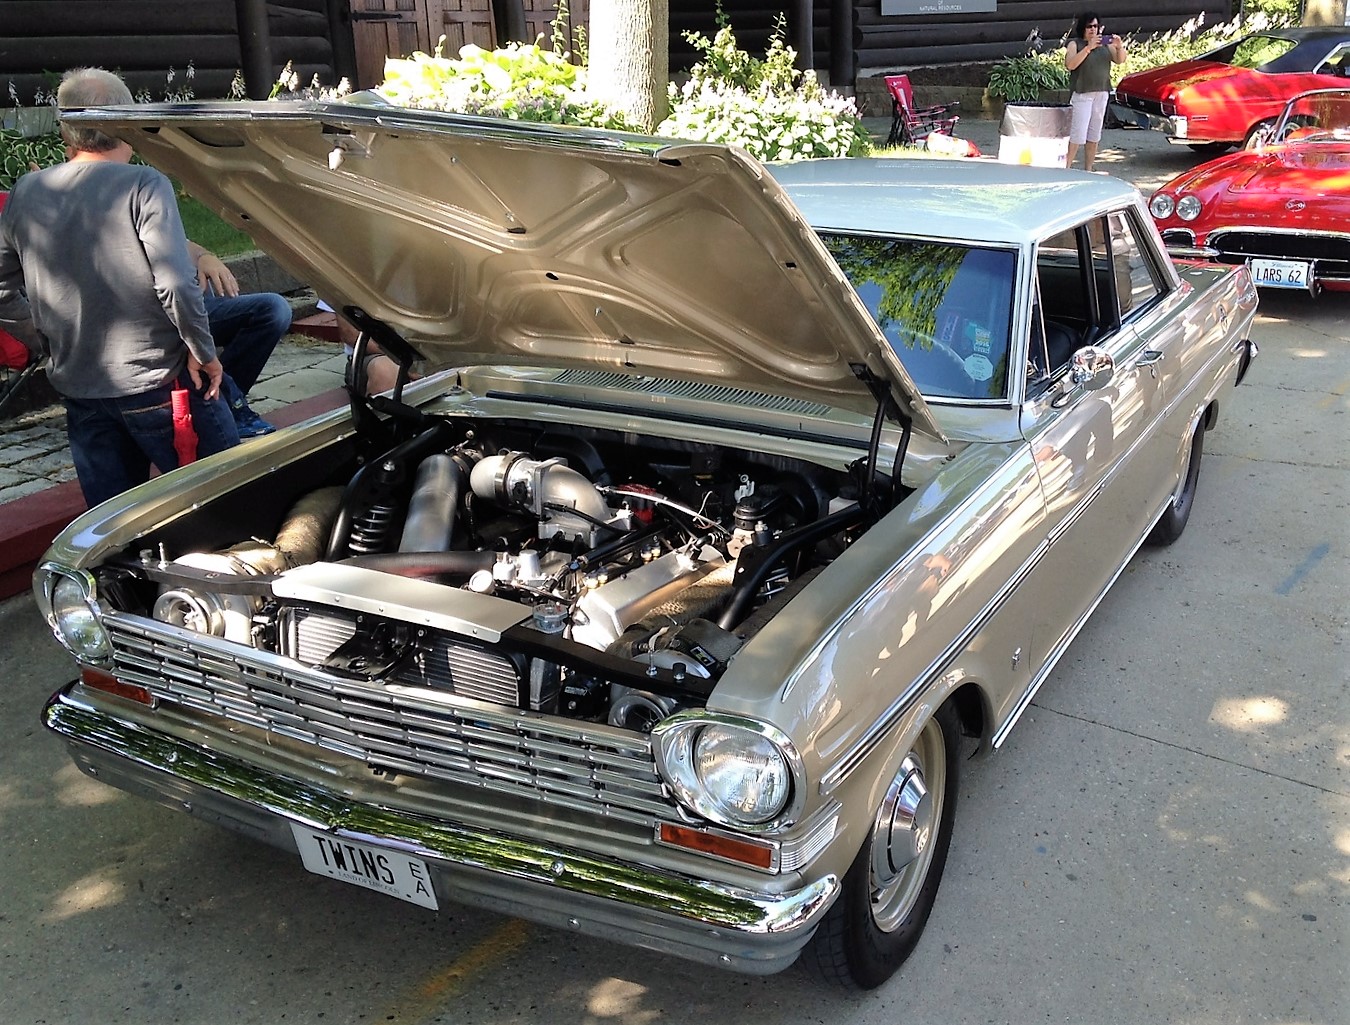 , Car Craft Magazine Summer Nationals embrace individuality, ClassicCars.com Journal